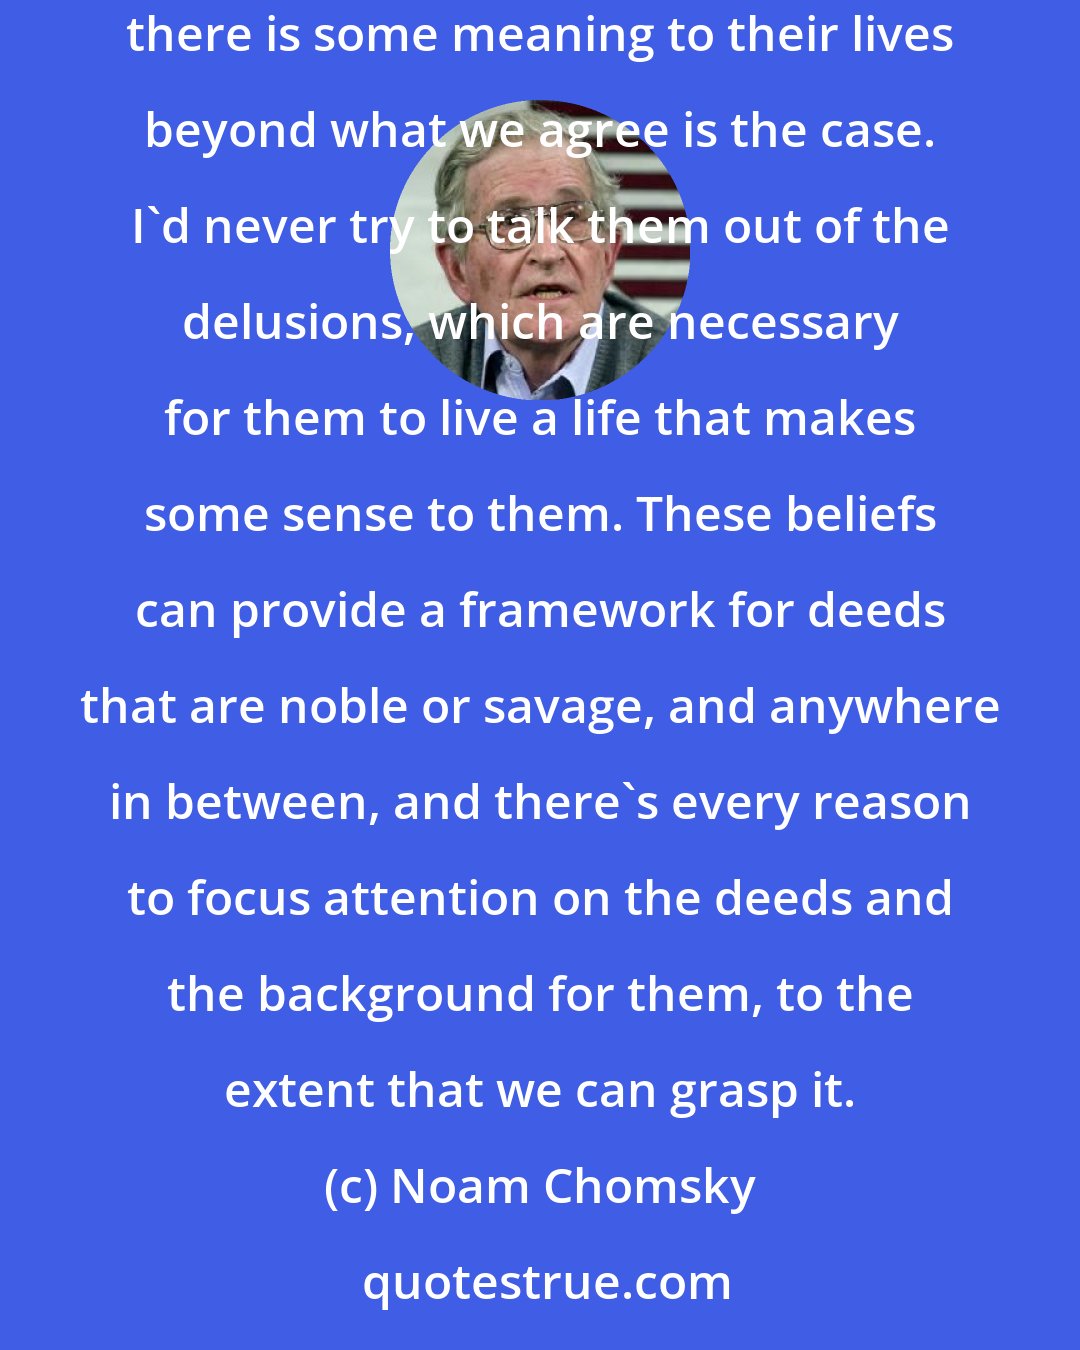 Noam Chomsky: As for the various religions, there's no doubt that they are very meaningful to adherents, and allow them to delude themselves into thinking there is some meaning to their lives beyond what we agree is the case. I'd never try to talk them out of the delusions, which are necessary for them to live a life that makes some sense to them. These beliefs can provide a framework for deeds that are noble or savage, and anywhere in between, and there's every reason to focus attention on the deeds and the background for them, to the extent that we can grasp it.